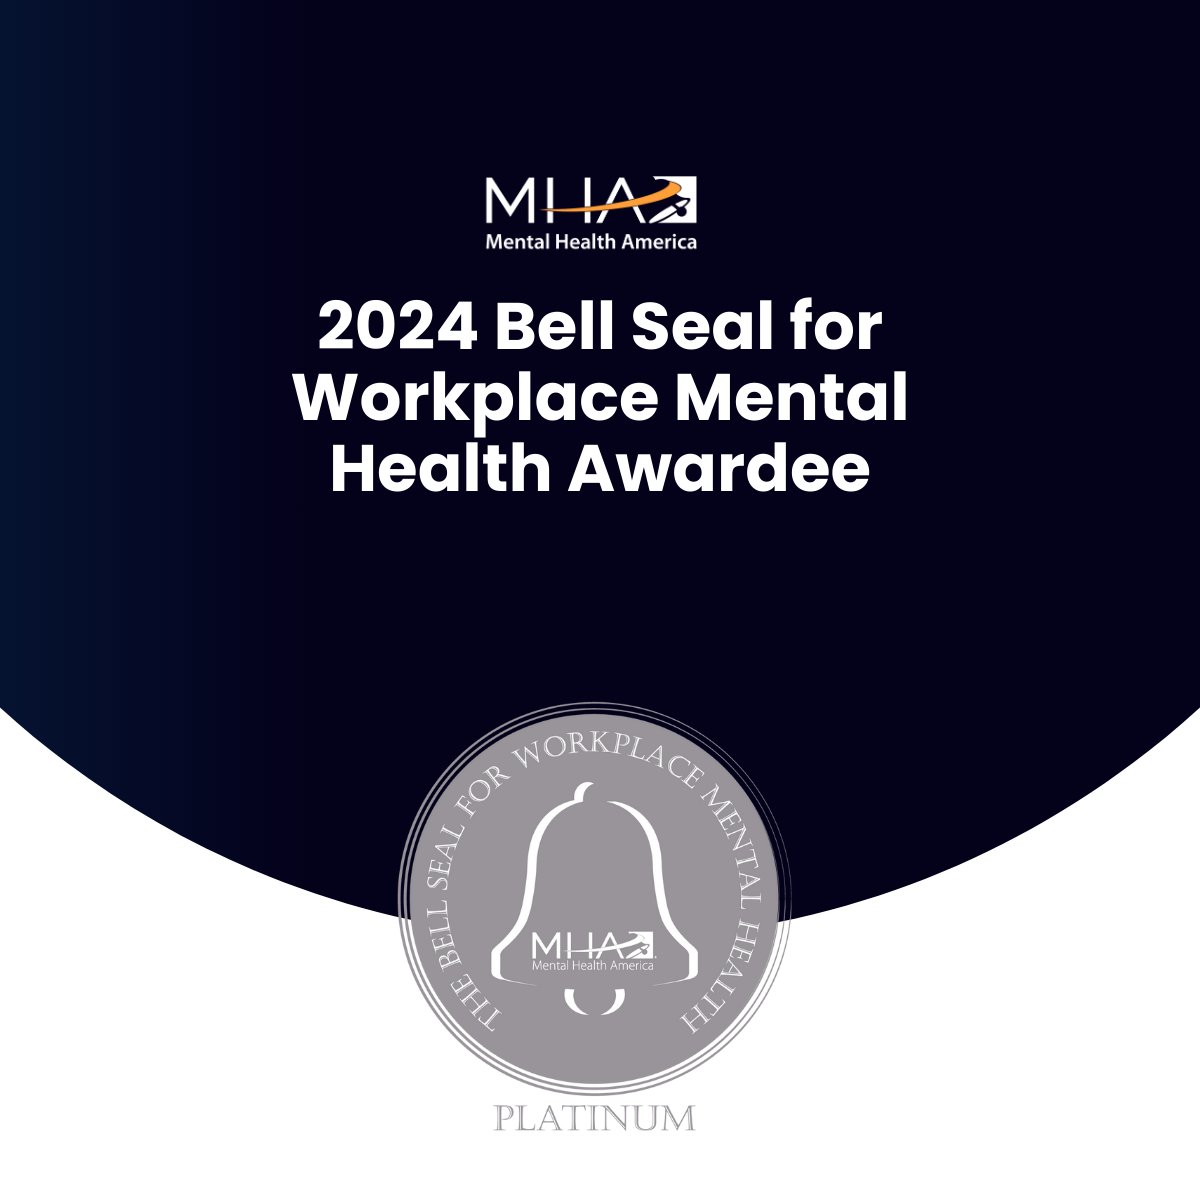 This #MentalHealthAwarenessWeek, we are proud to share that Mental Health America has awarded abrdn the Platinum Bell Seal for Workplace Mental Health.🏅